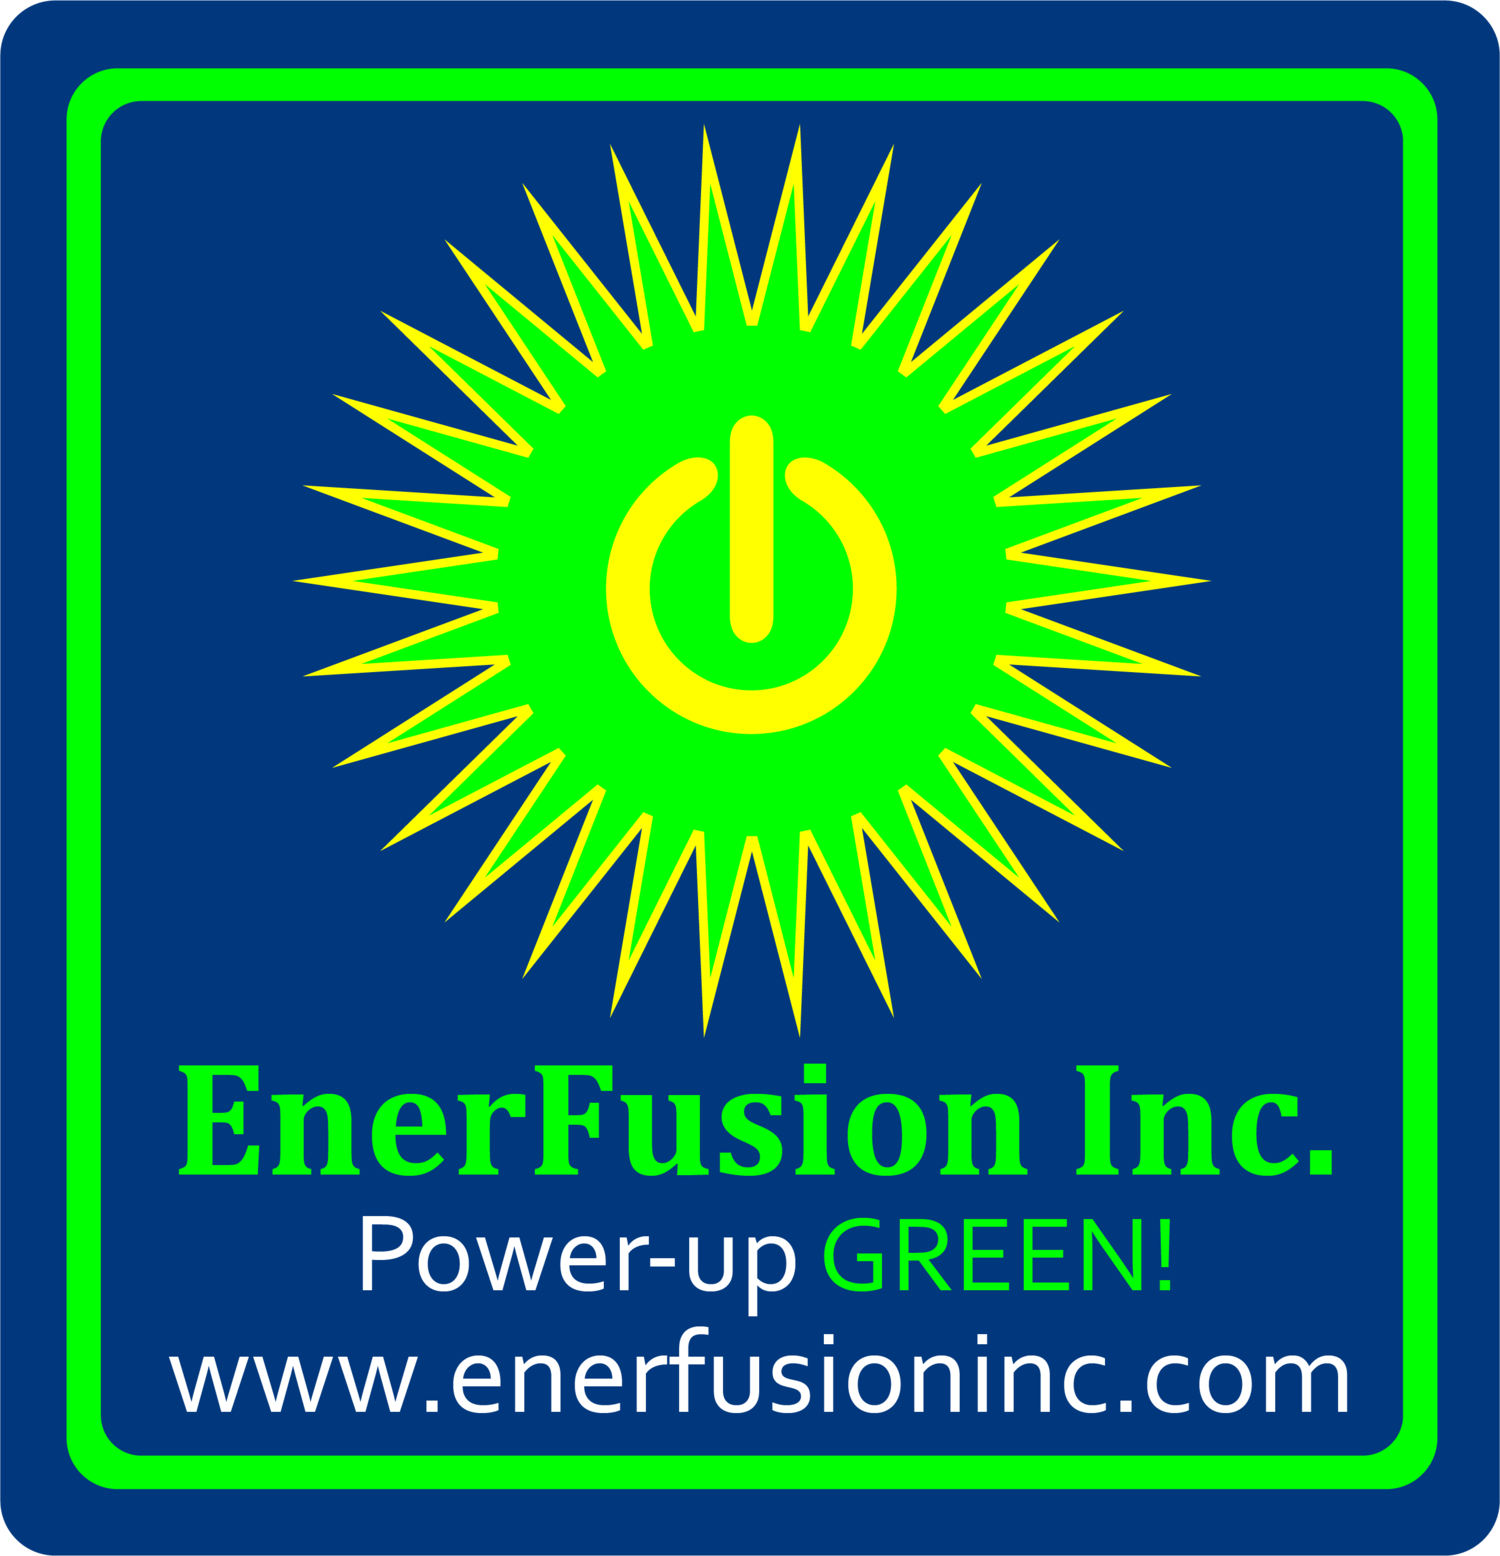 EnerFusion Inc. - Power-Up GREEN!